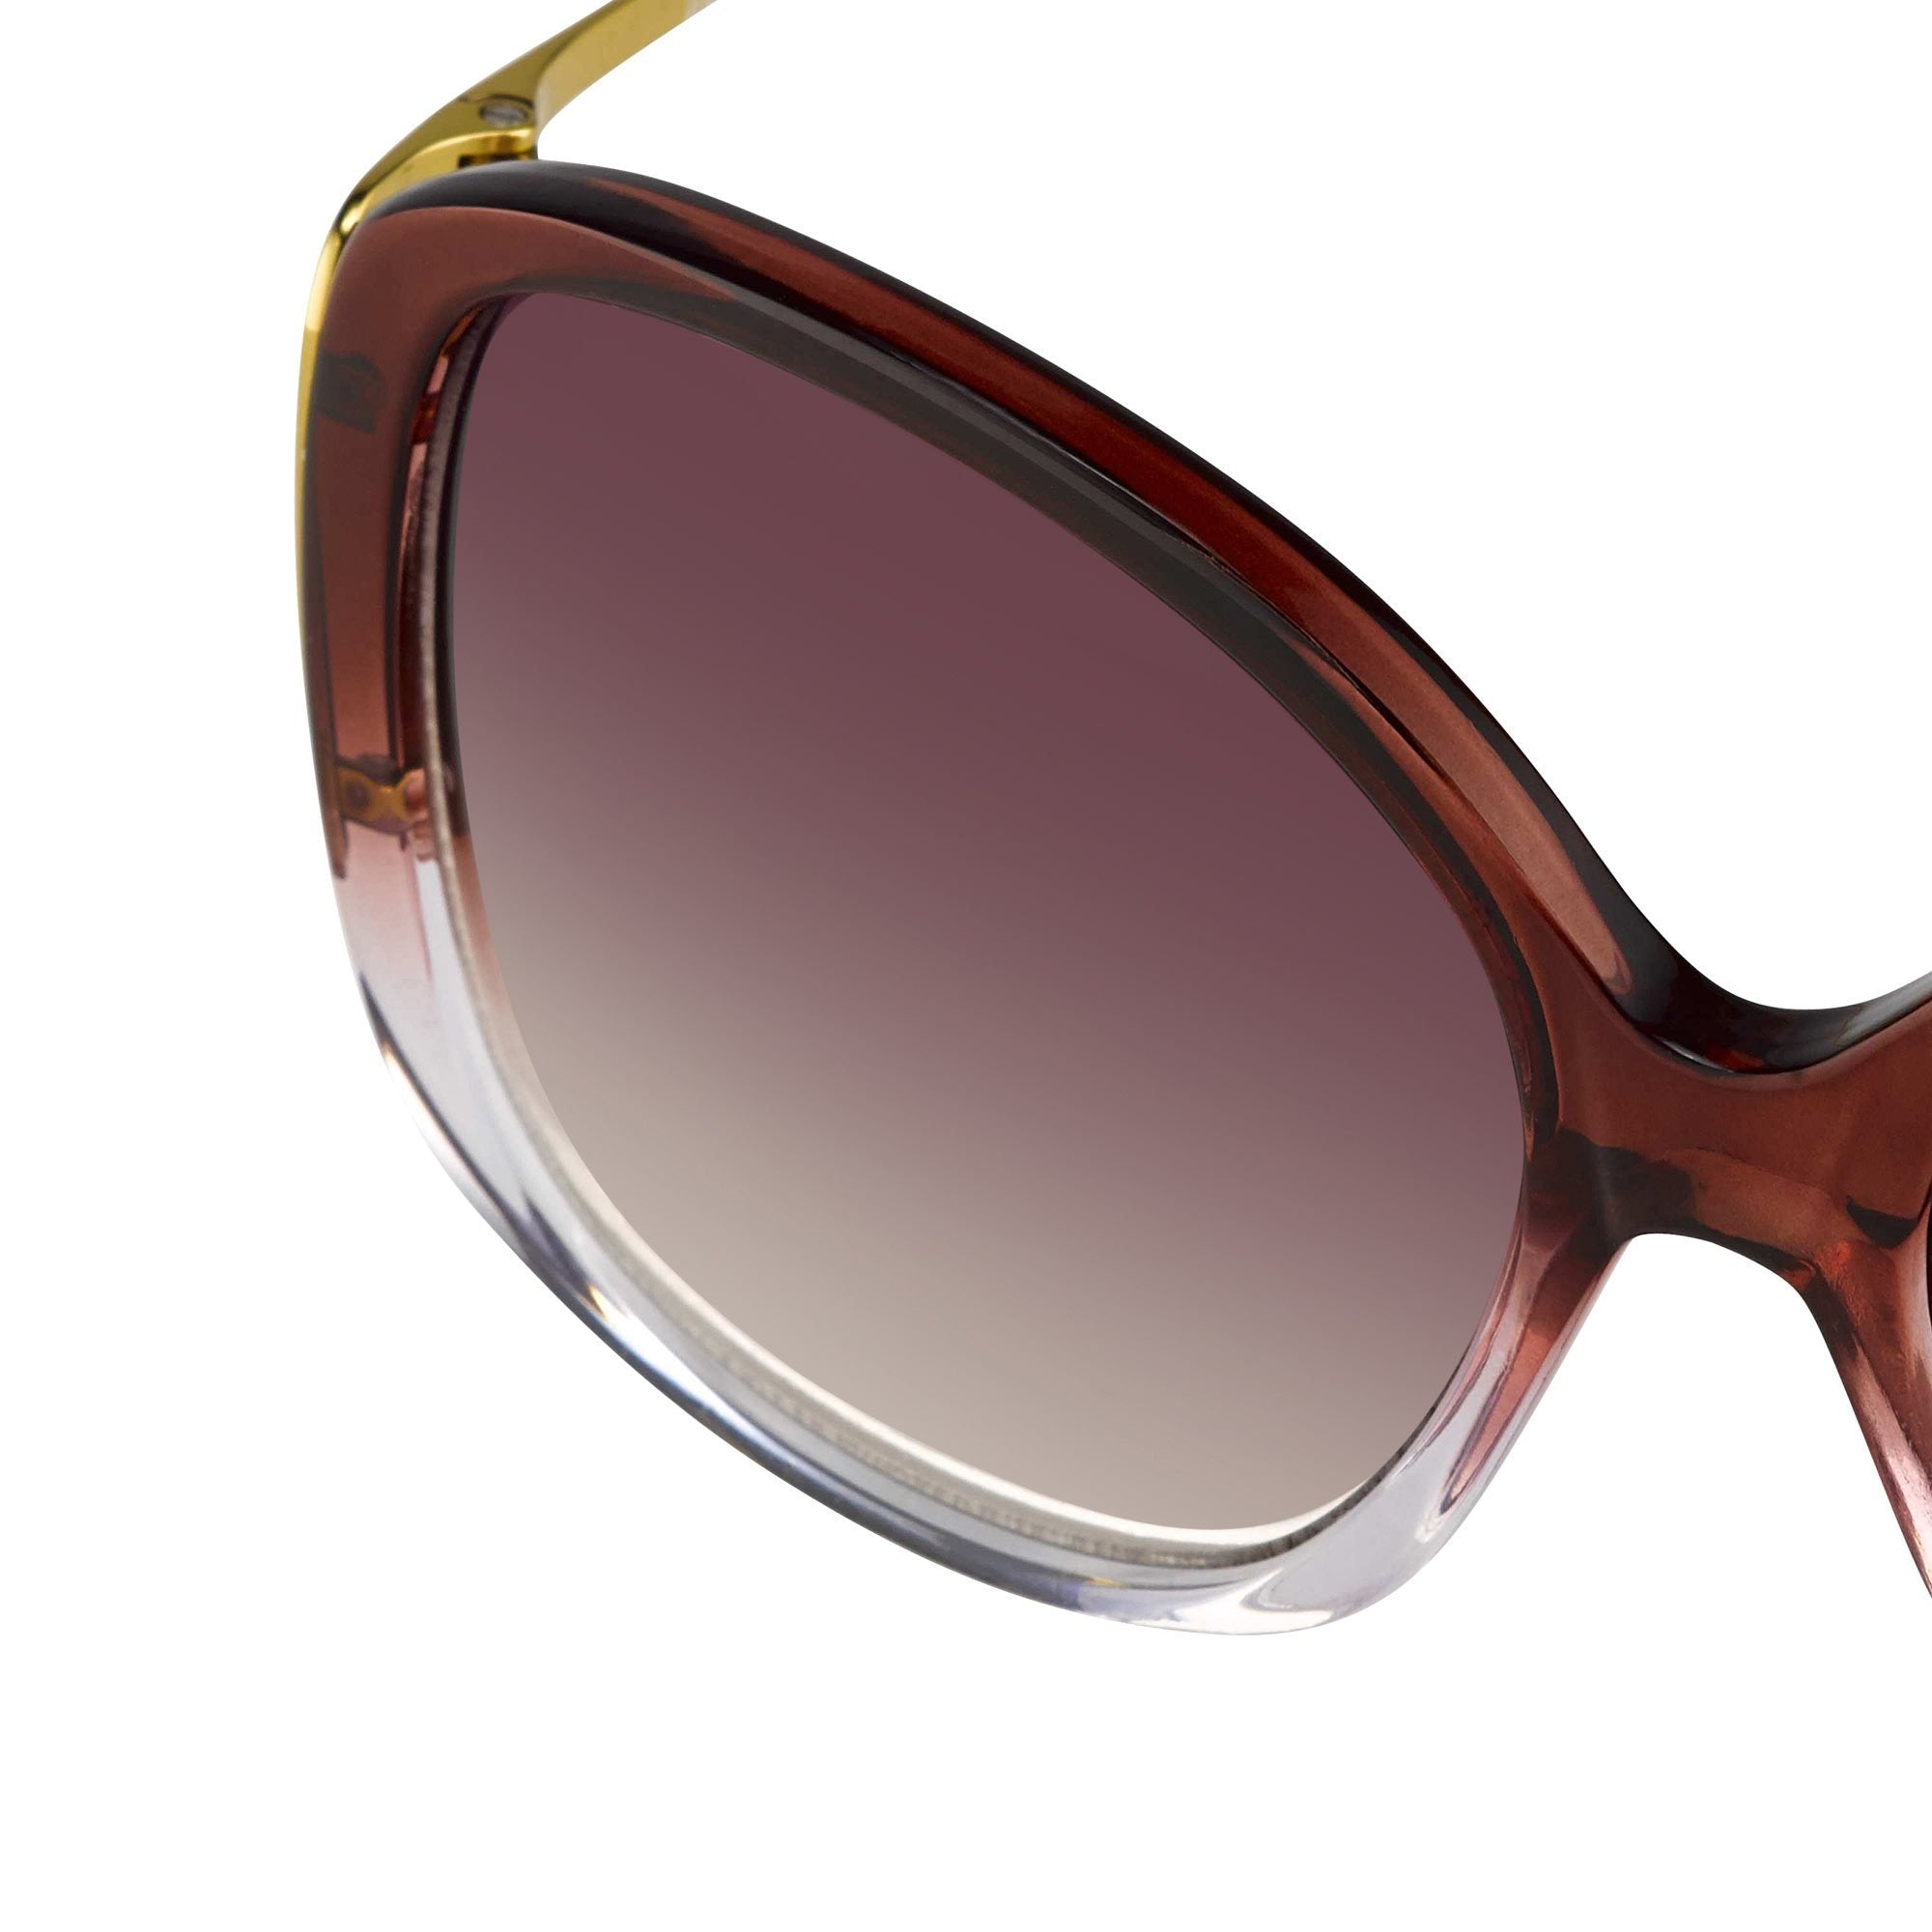 Prabal Gurung Sunglasses Oversized Female Maroon To Clear Frame Category 2 Red Gradient Lenses PG23C4SUN - Watches & Crystals